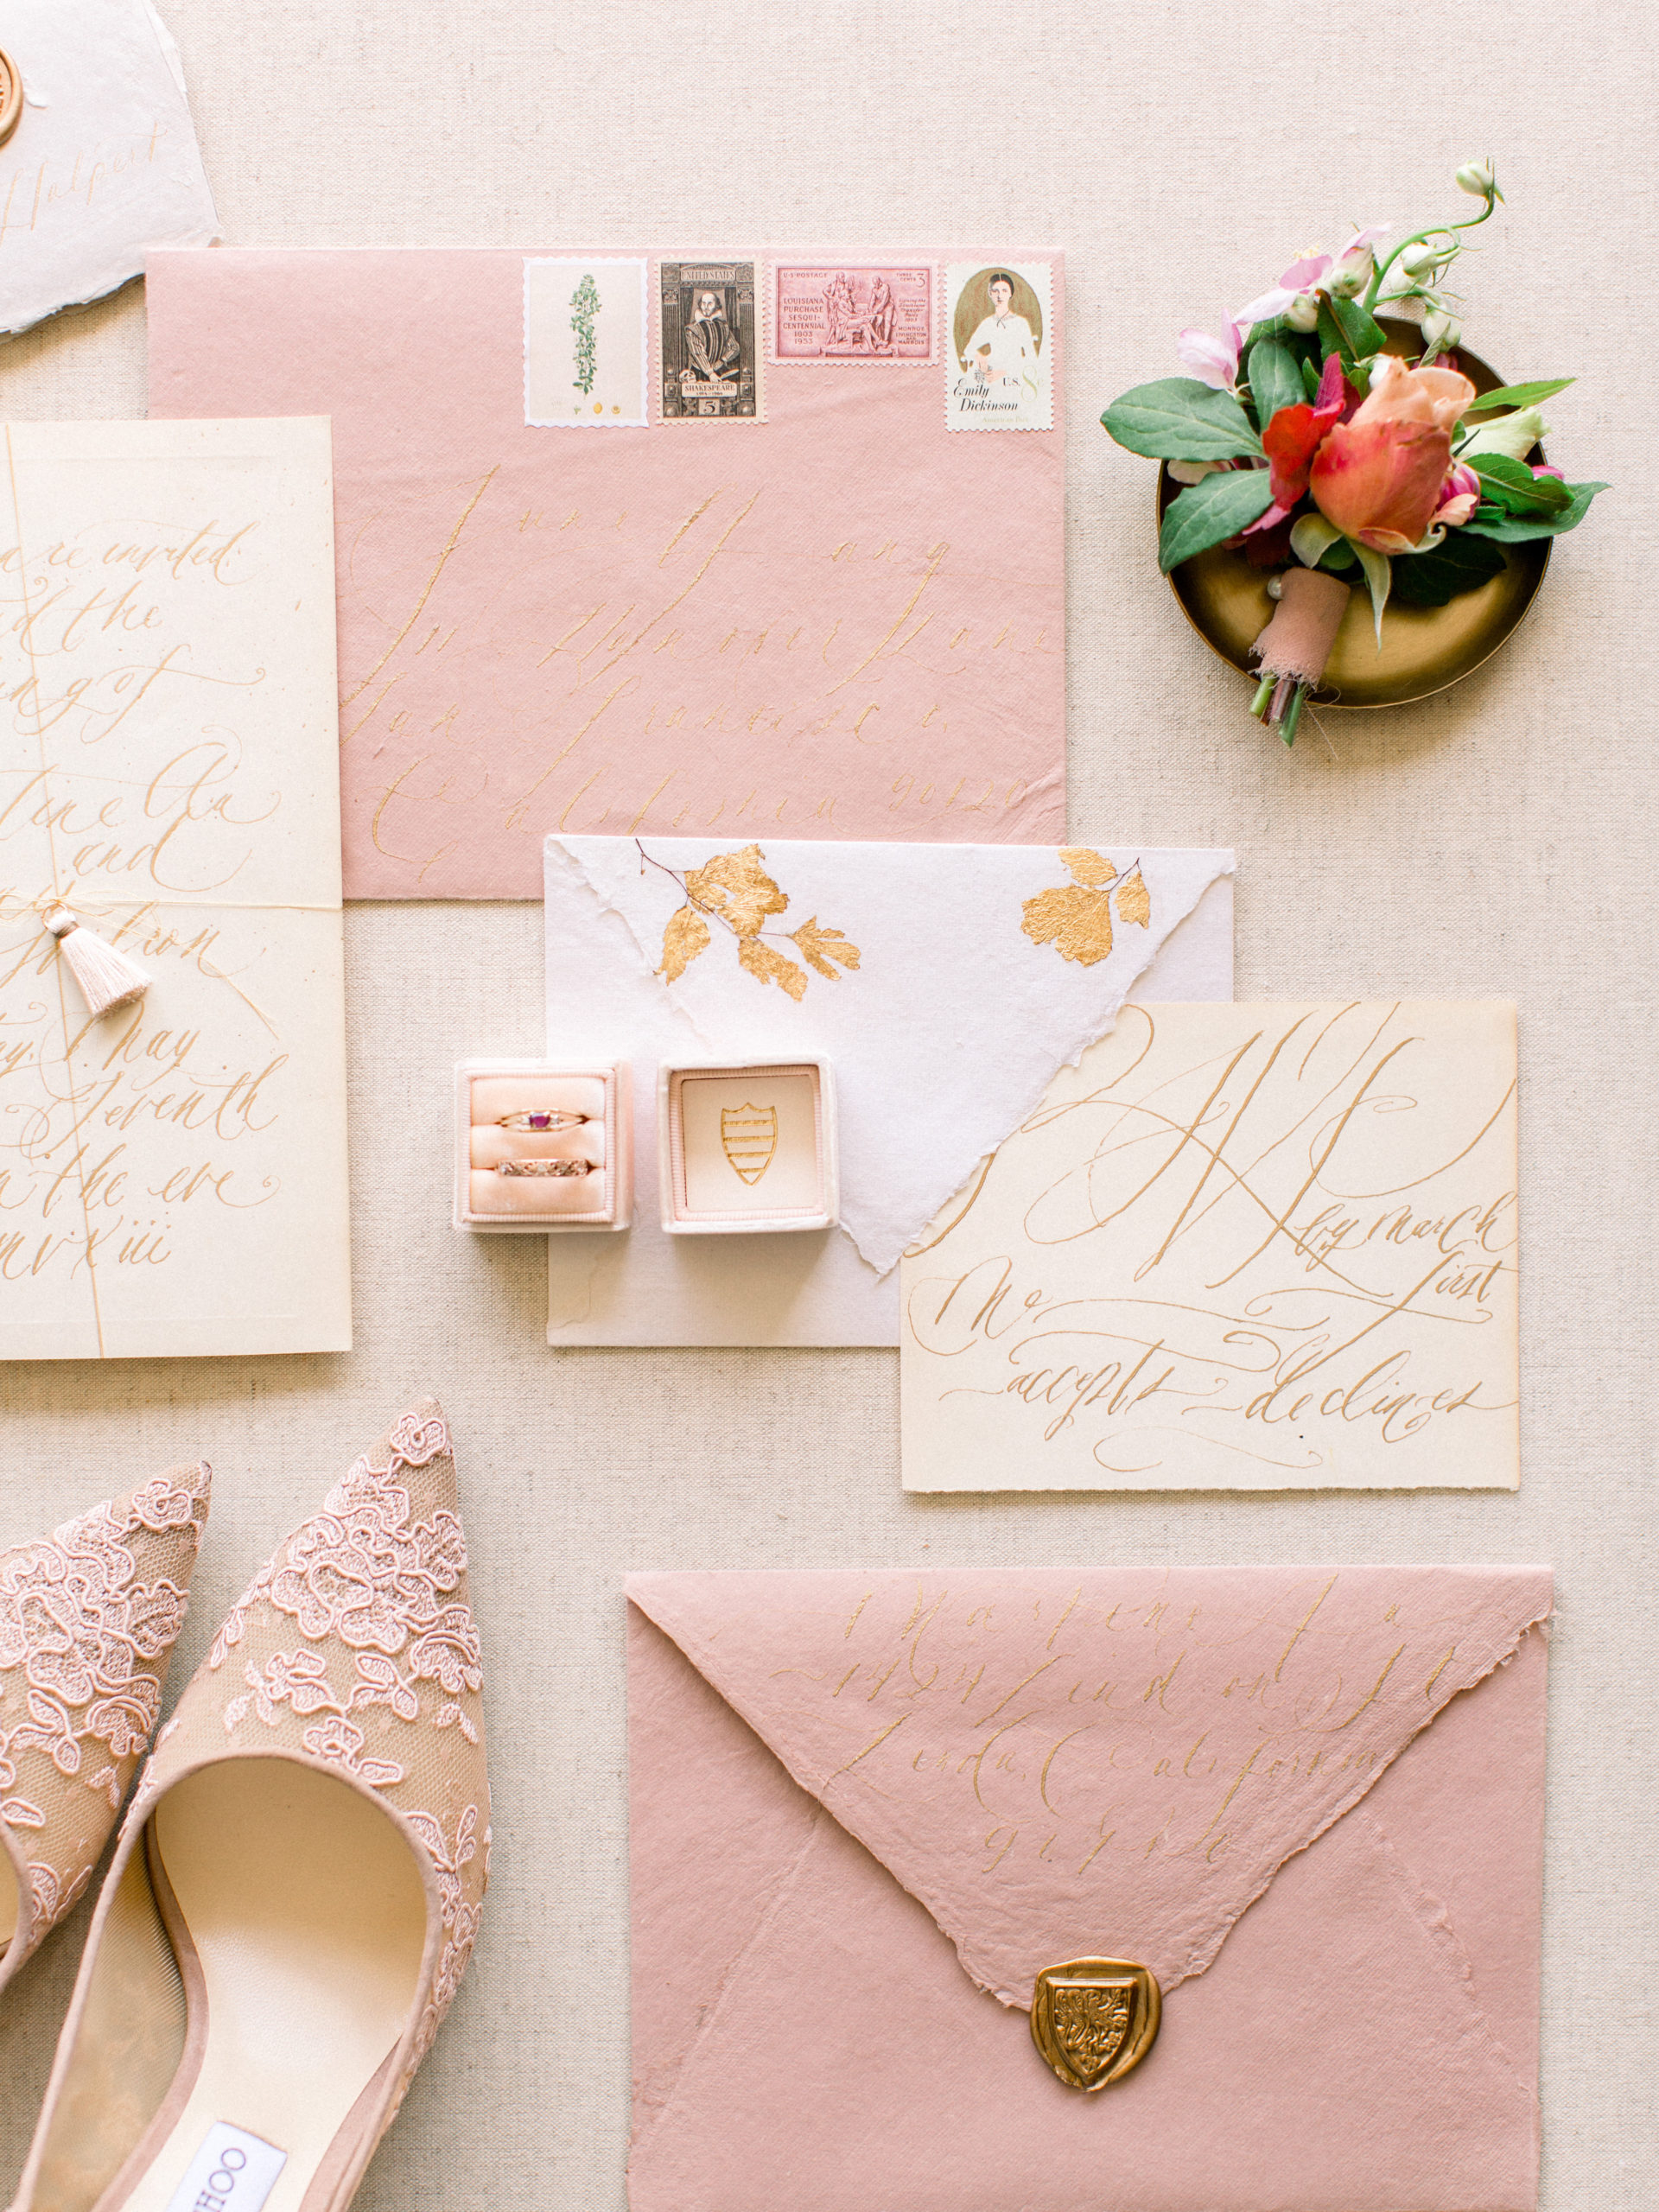 styled rose gold wedding invitation suite with calligraphy by Shasta Bell and boutonniere by Studio Fleurette.